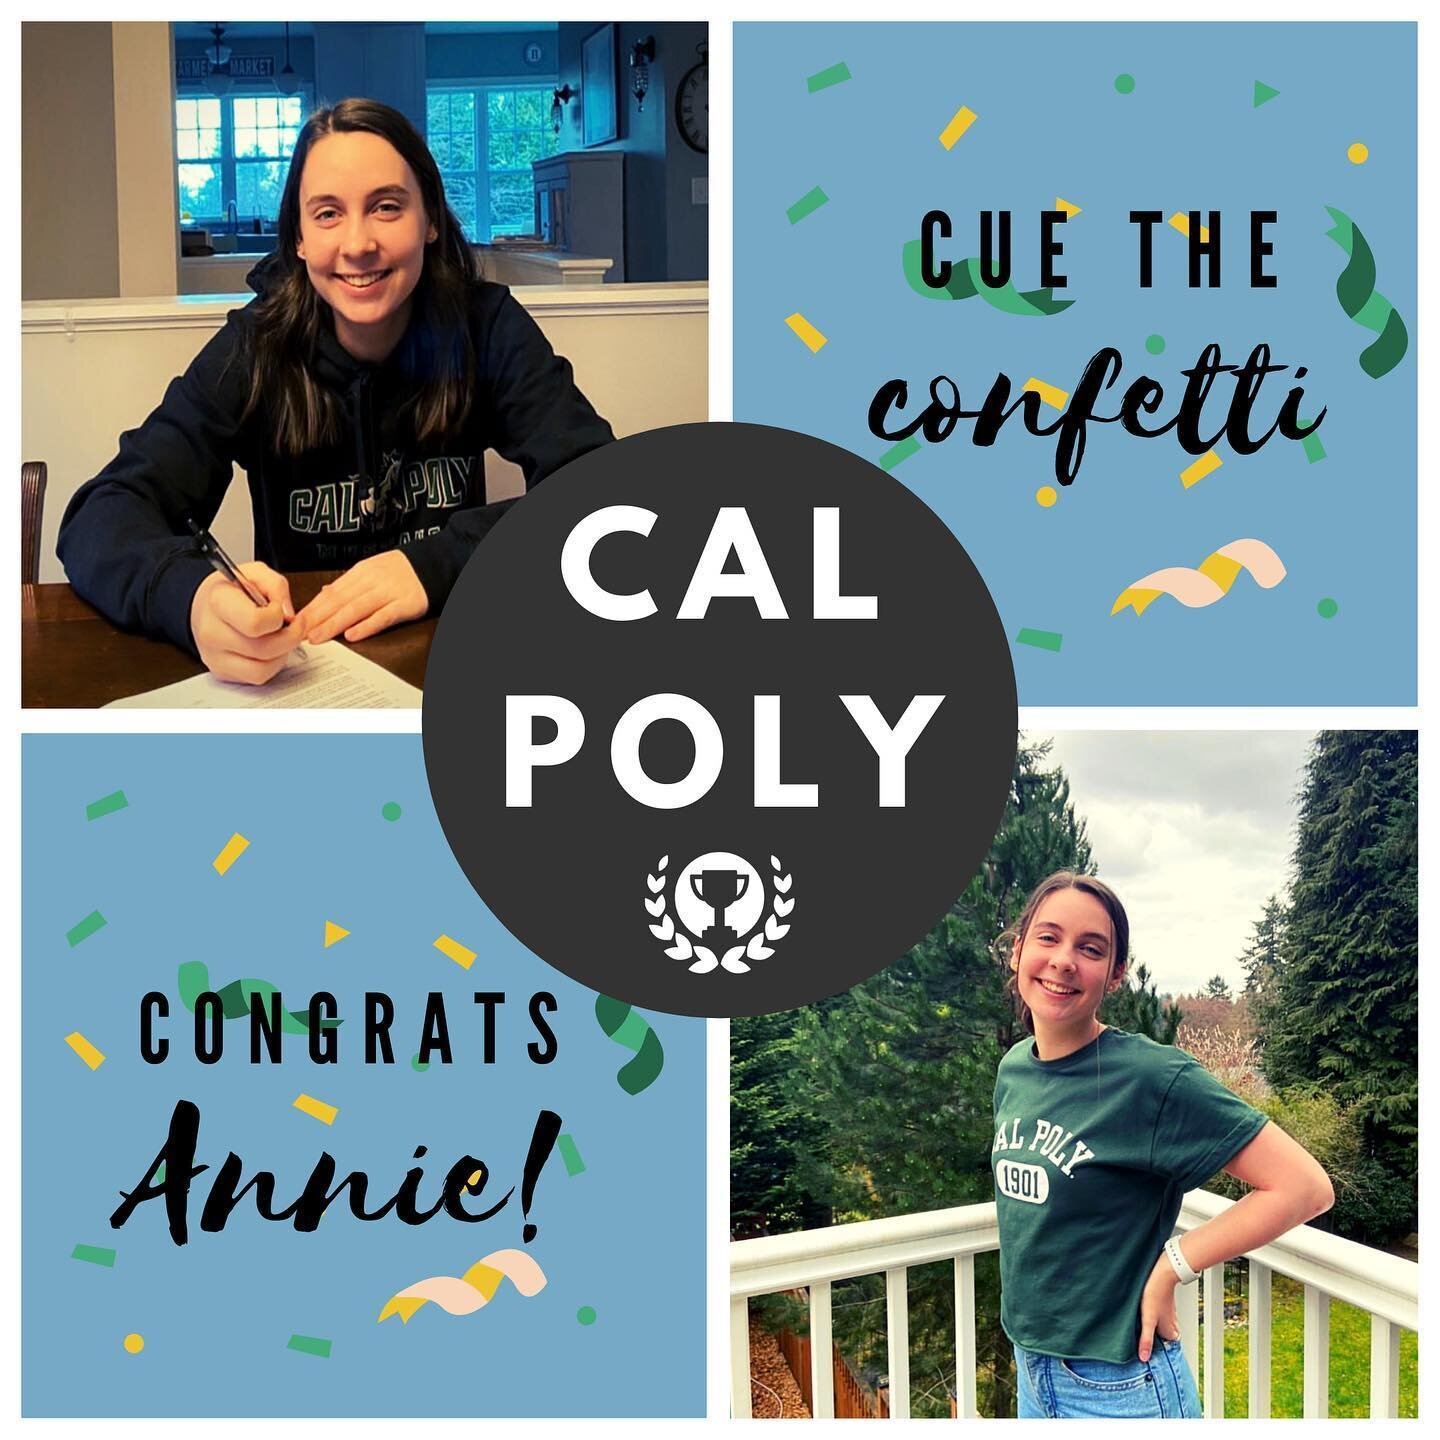 🎉Congratulations to @ahatzenbeler on committing to Cal Poly! 🏆
.
Continue to be a leader and set the tone, Cal Poly is lucky to have you! We&rsquo;re looking forward to watching you accomplish many things in this next chapter of your athletic and a